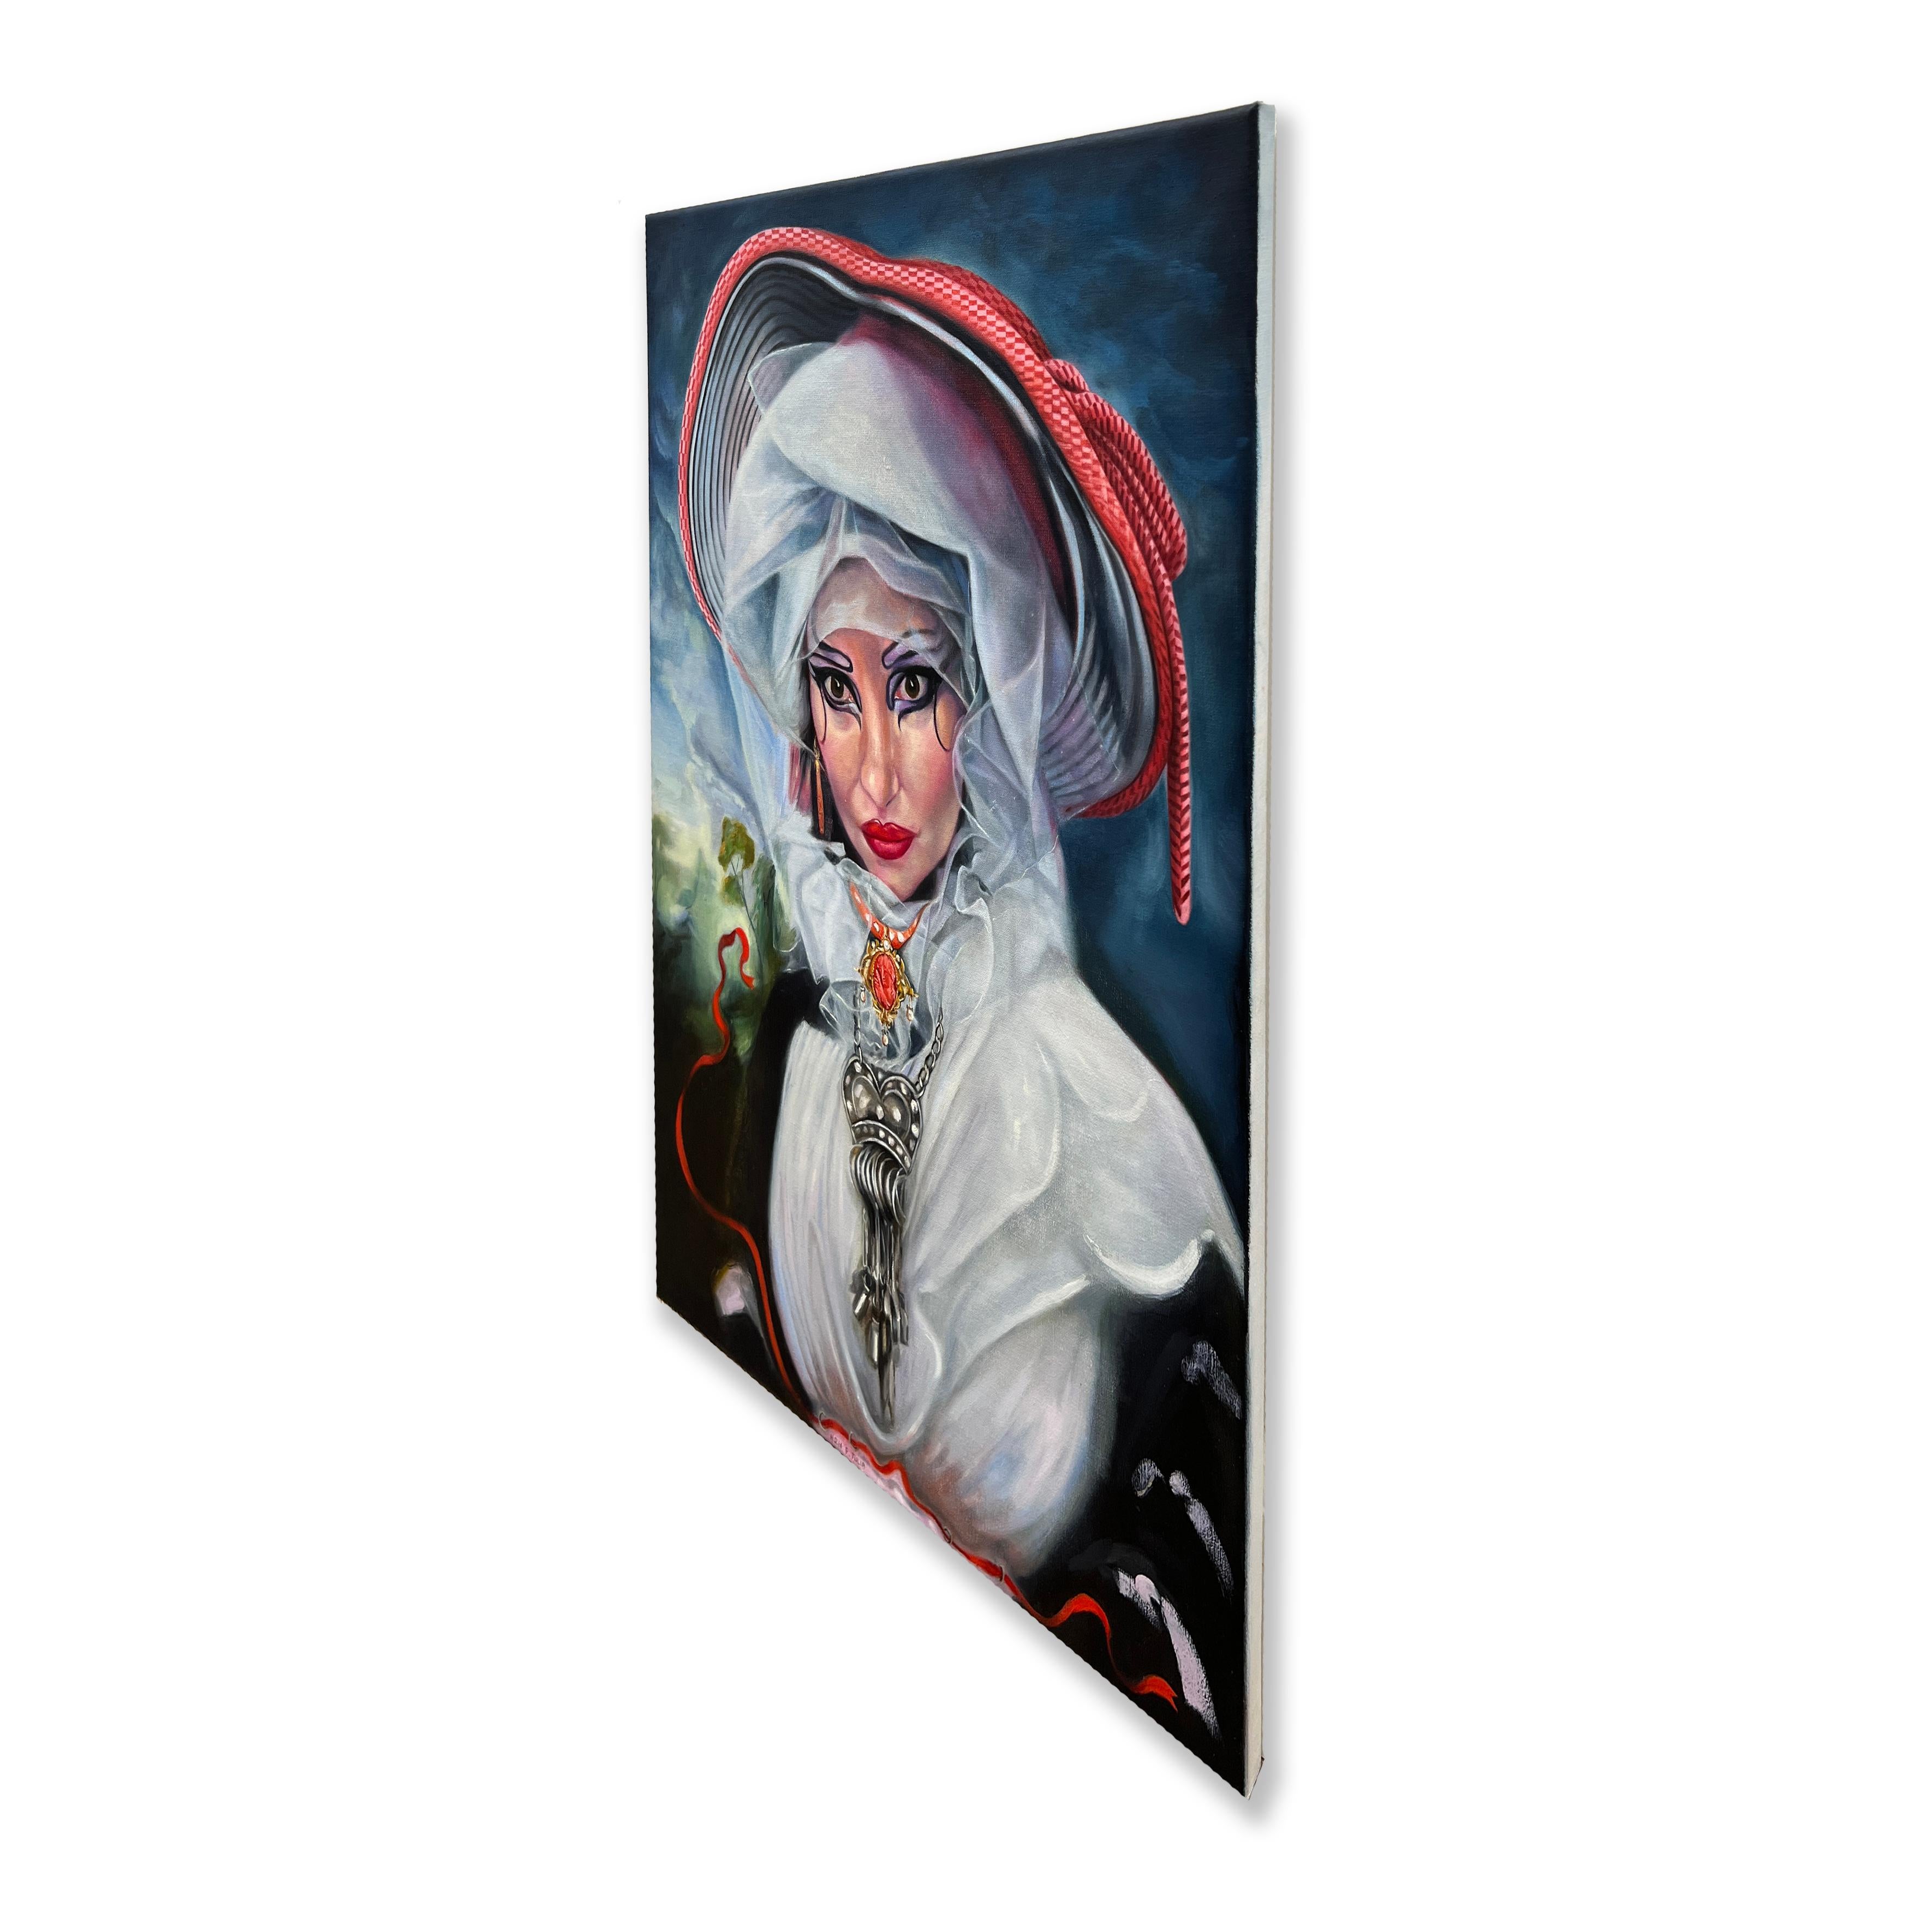 This small vertical 31 inch high by 23.5 inch wide original oil painting on canvas is wired and ready to hang. The detail in this artwork is astounding. From the gaze and makeup details around the eyes to the the ornate jewelry, Princess Julia is